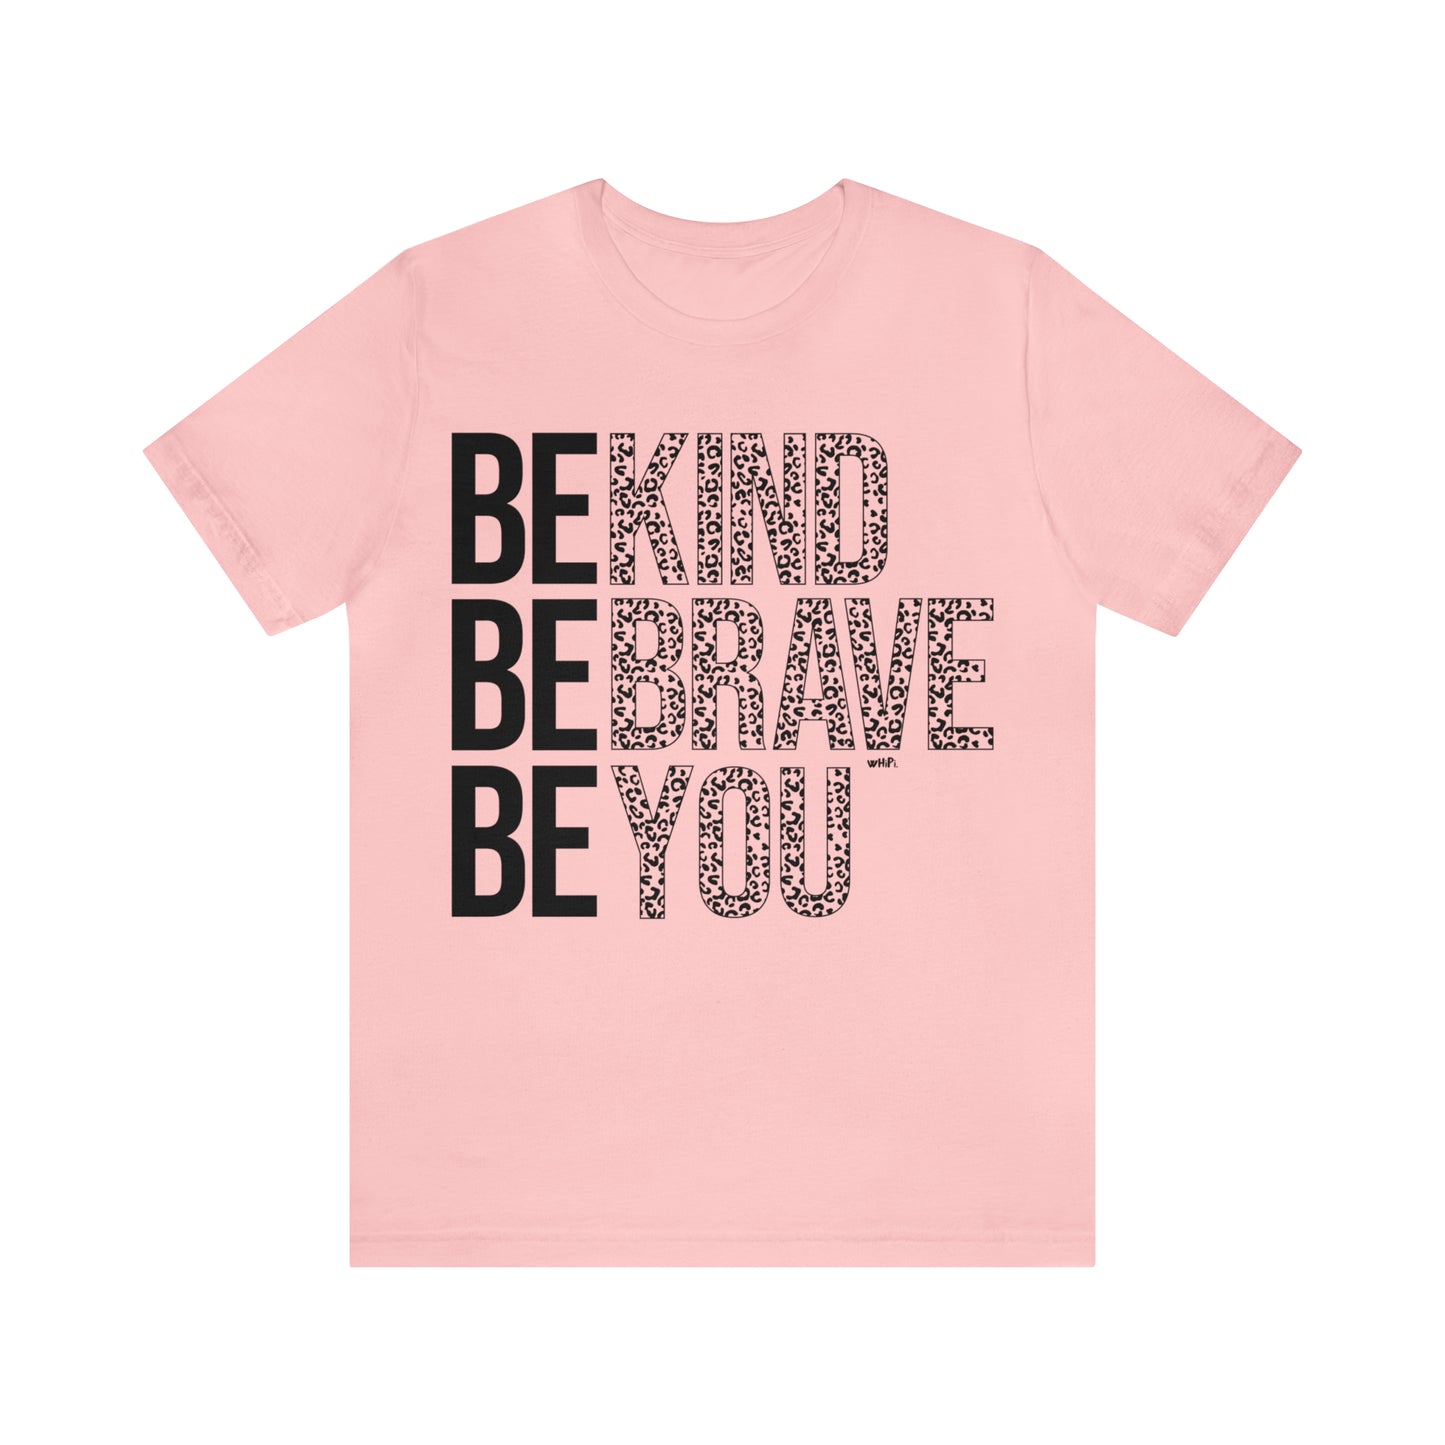 Be Kind Be Brave Be You